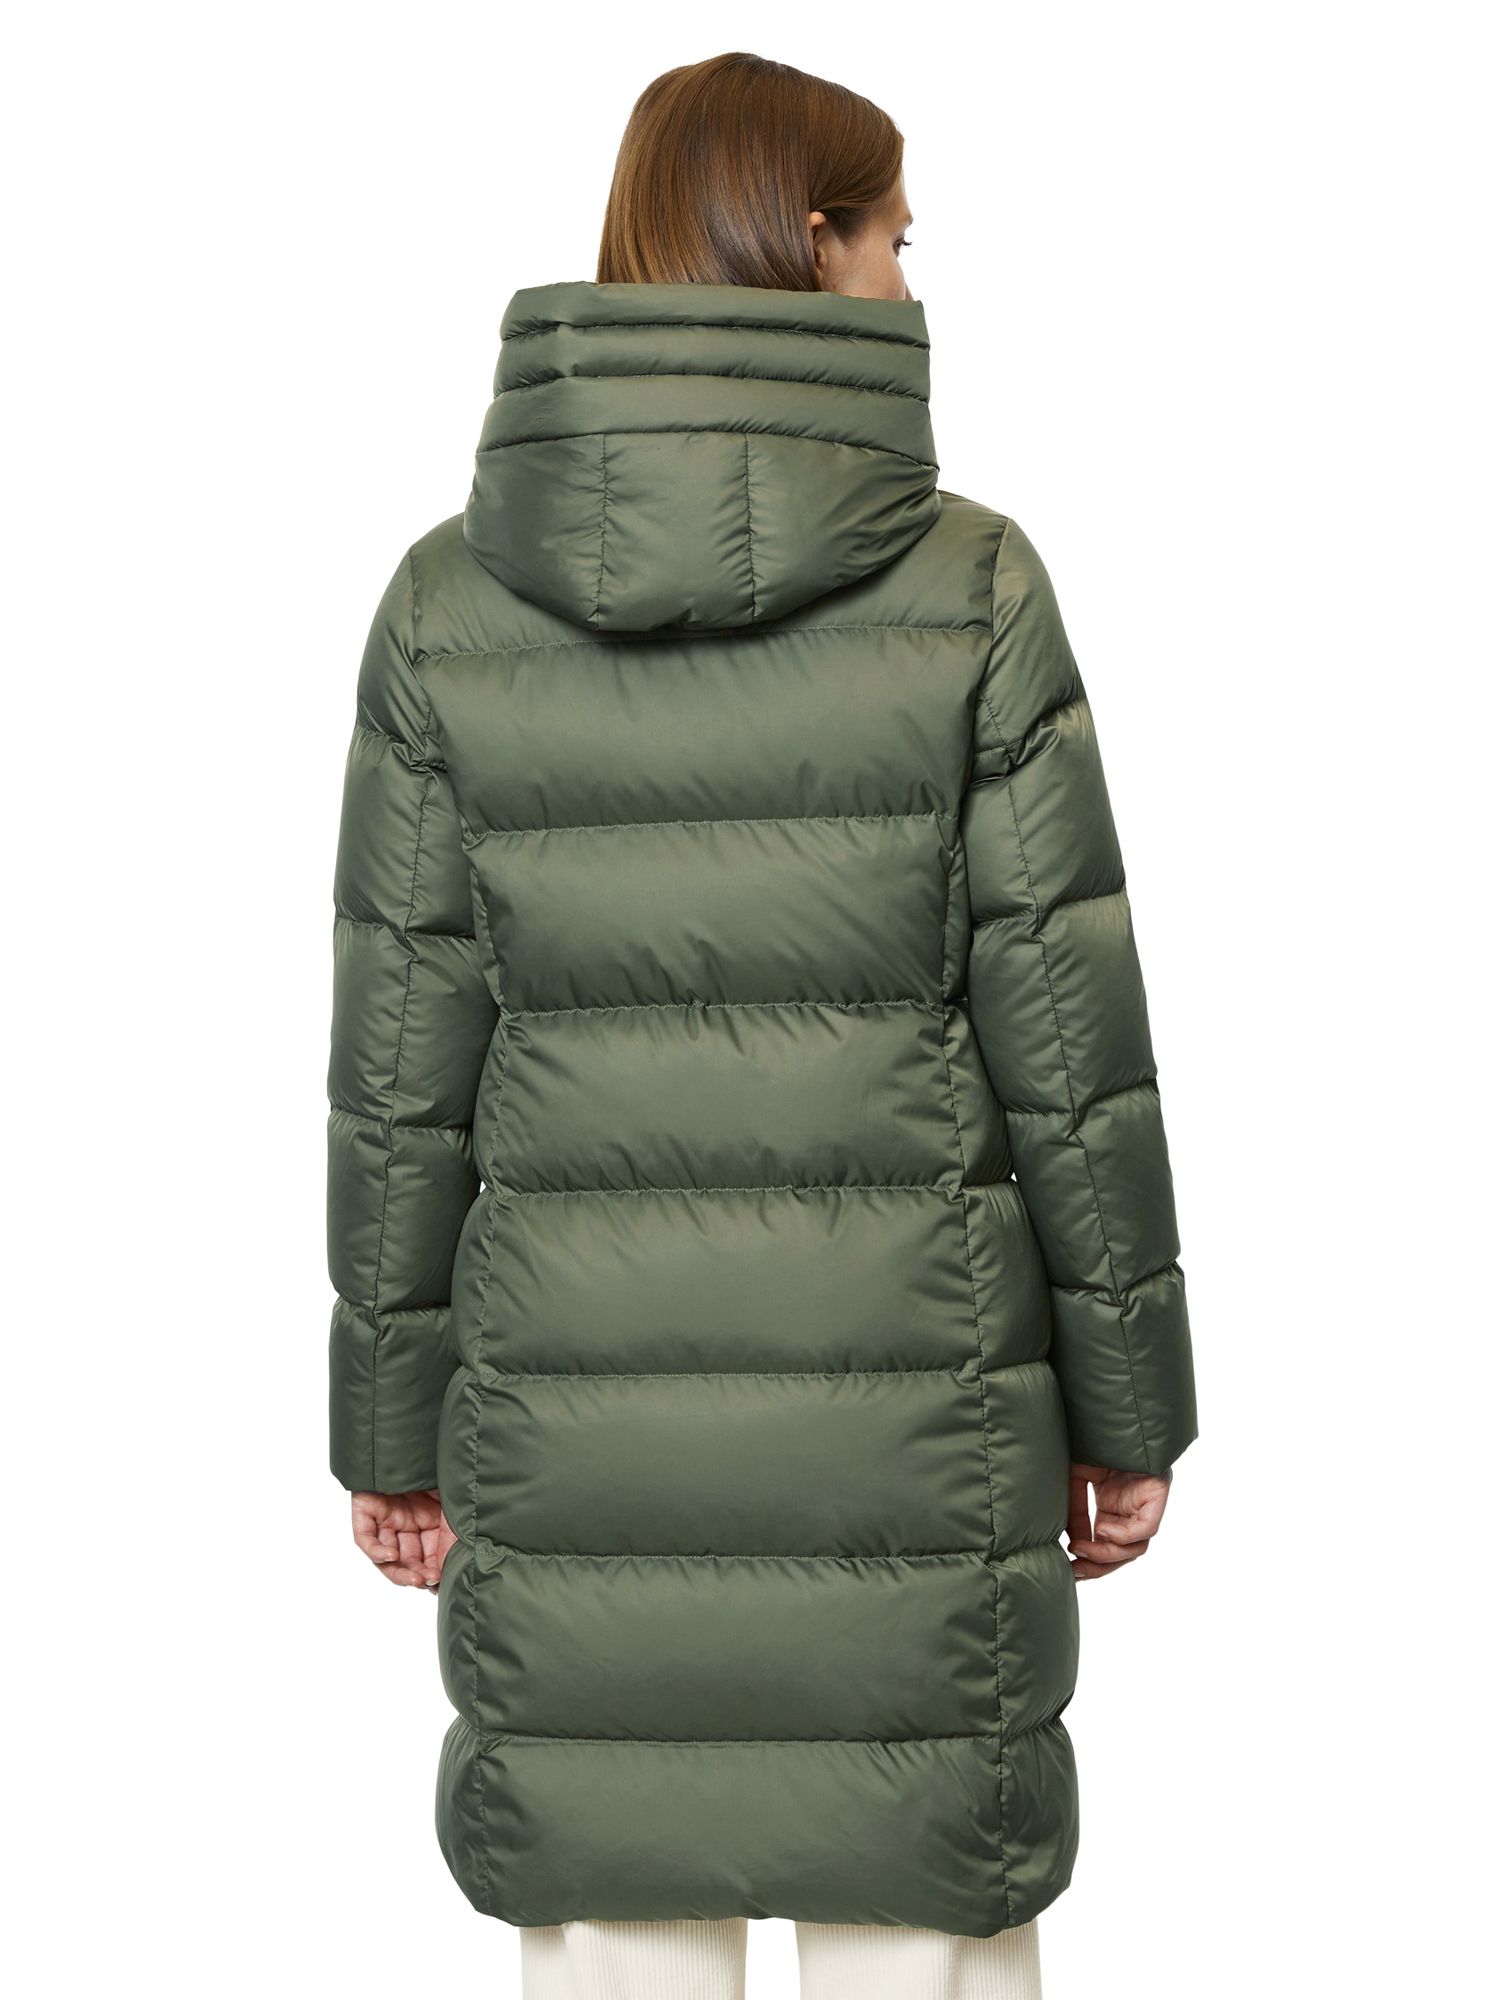 Buy Marc O'Polo Hooded Down Coat, Olive Online at johnlewis.com